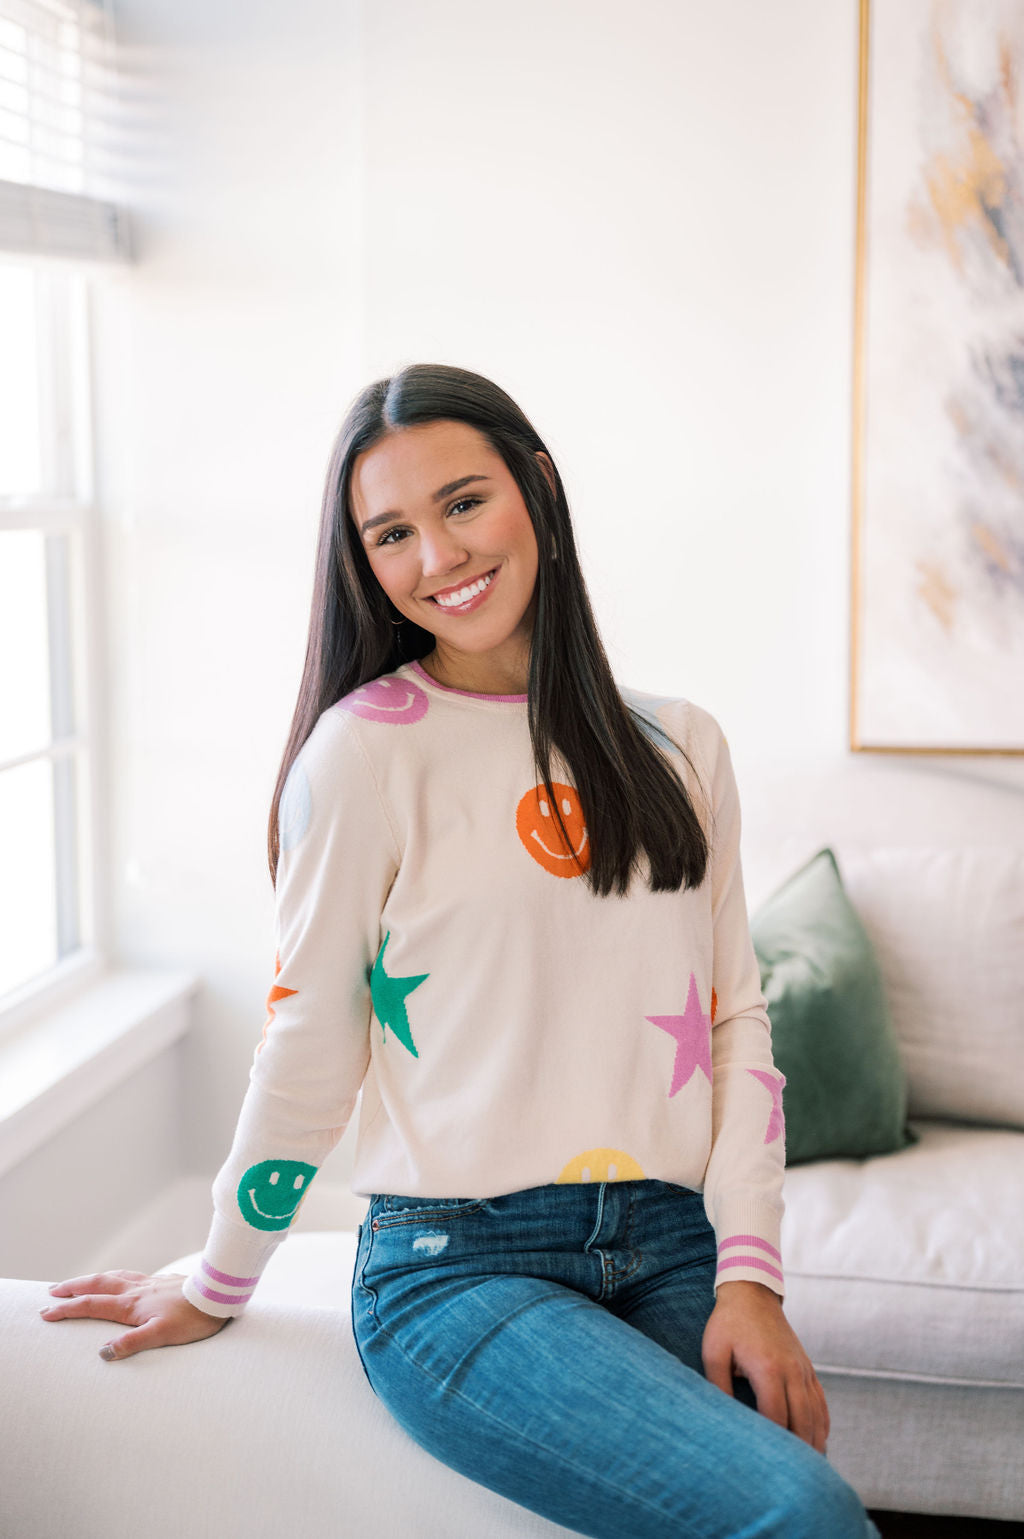 SMILEY FACE AND STAR PRINT SWEATER